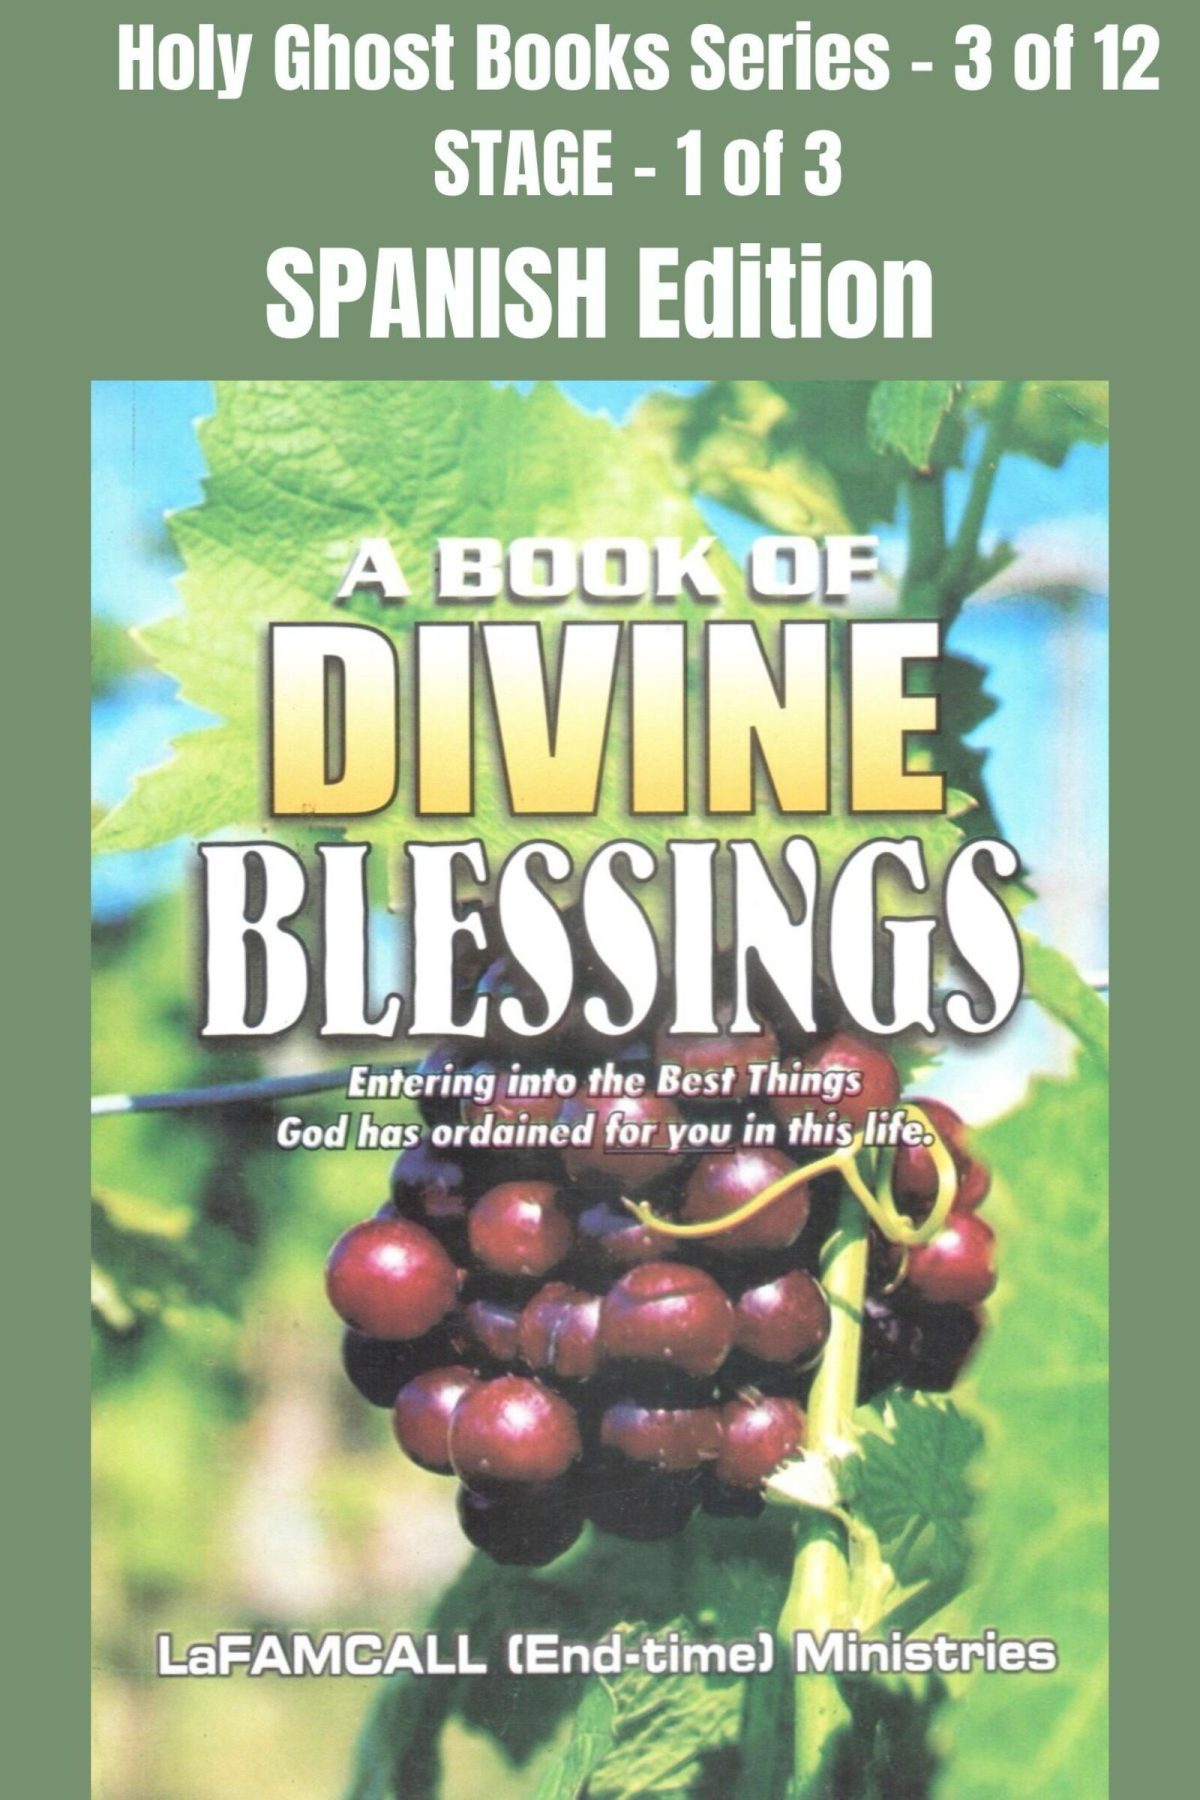 A Book on Divine Blessing Spanish - A BOOK OF DIVINE BLESSINGS - Entering into the Best Things God has ordained for you in this life - SPANISH EDITION - Ebook School of the Holy Spirit Series 3 of 12, Stage 1 of 3